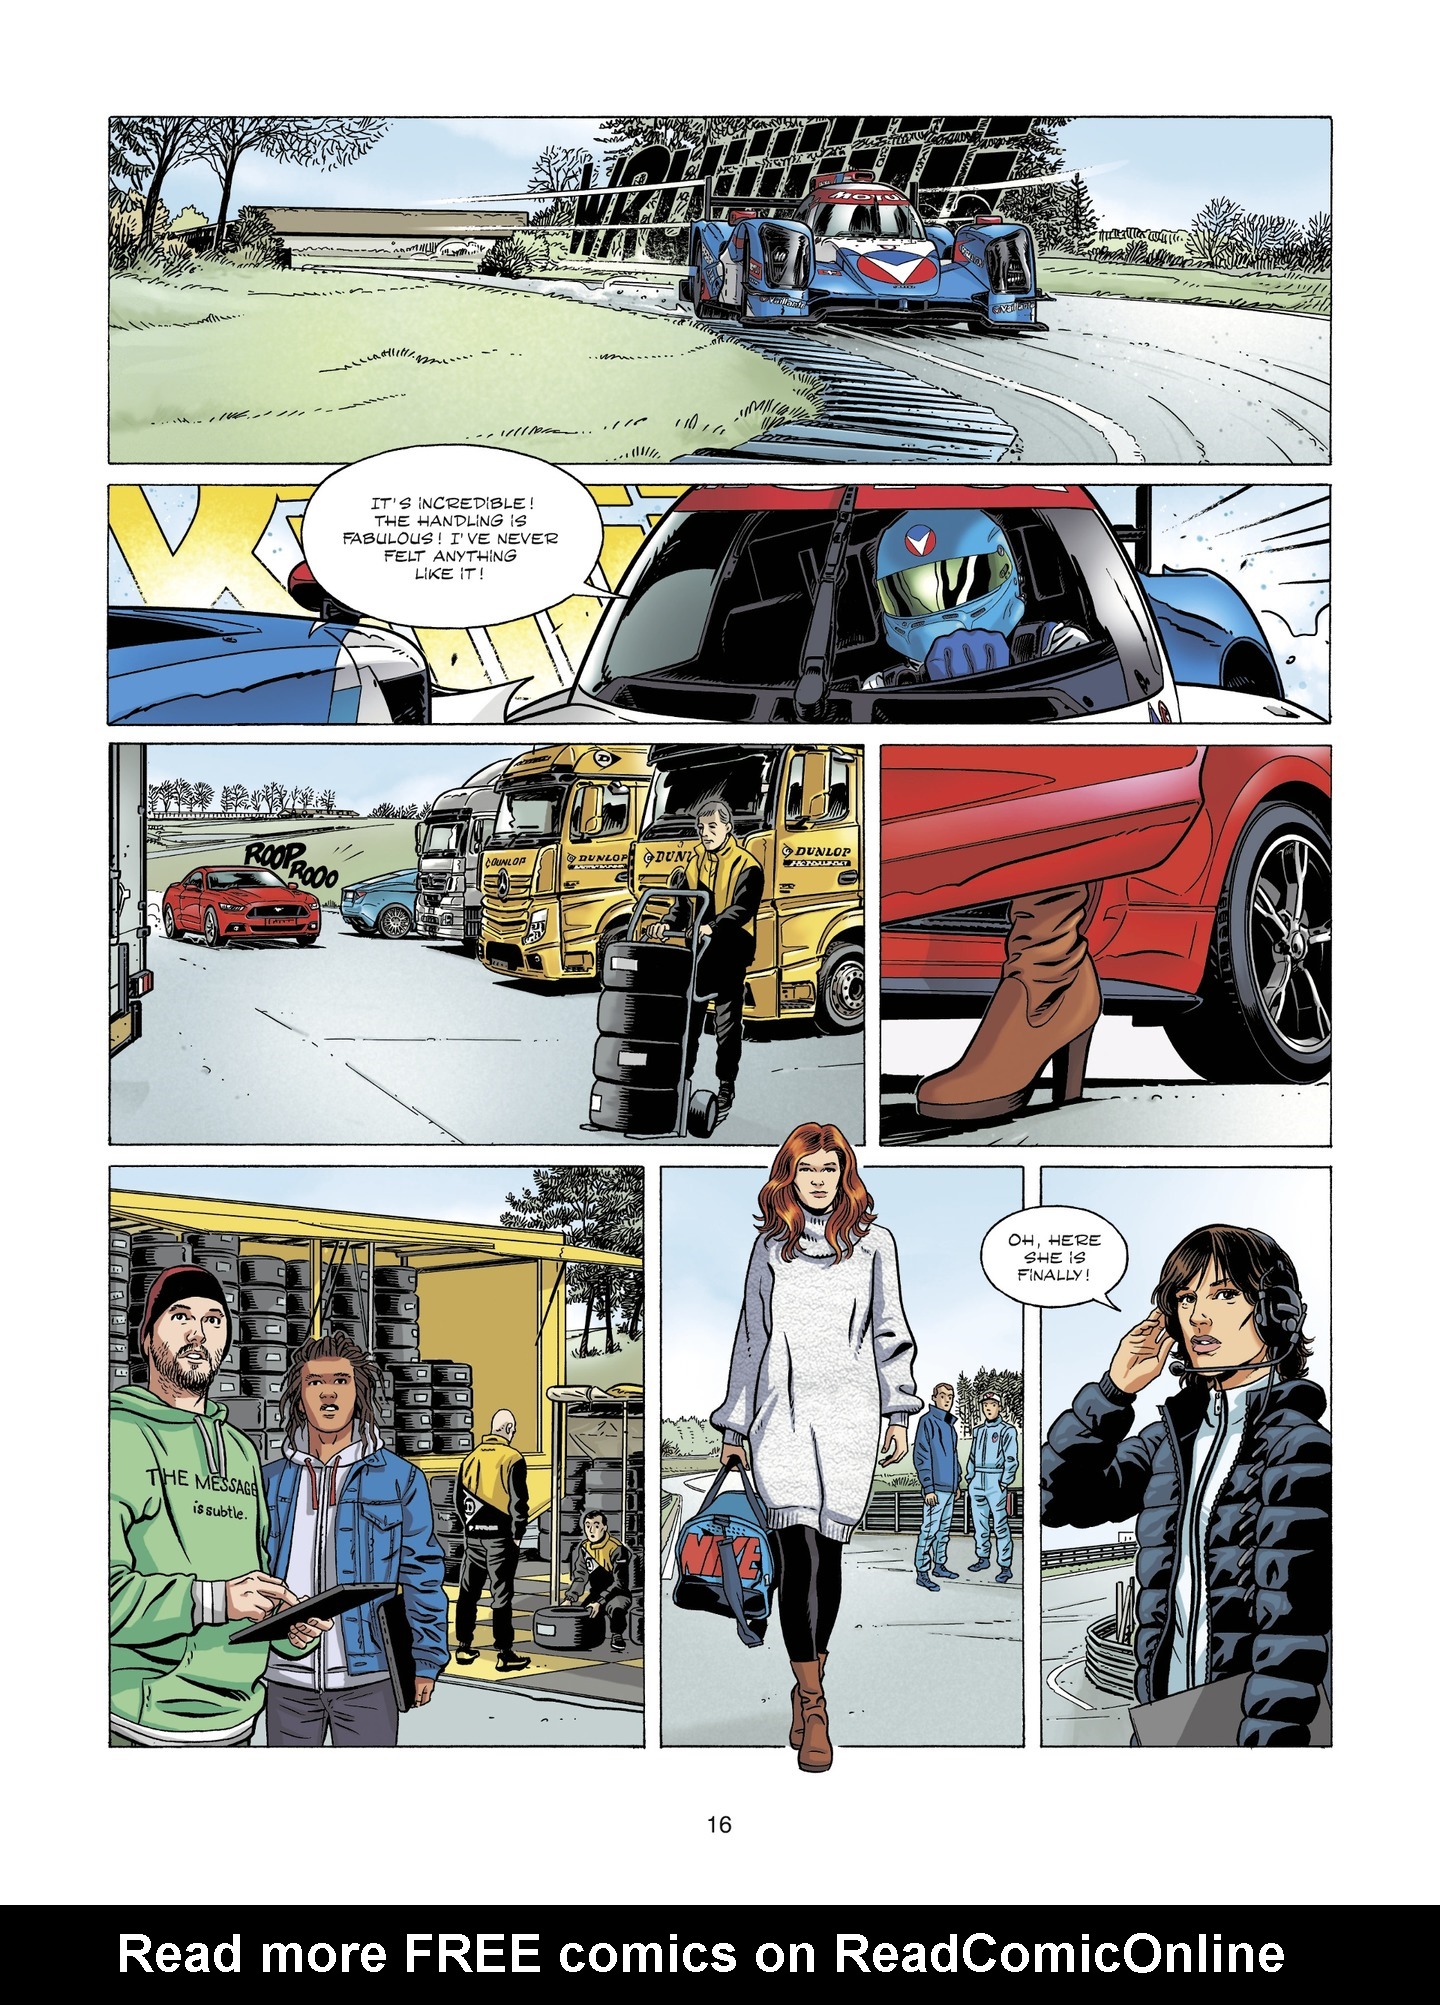 Read online Michel Vaillant comic -  Issue #6 - 16